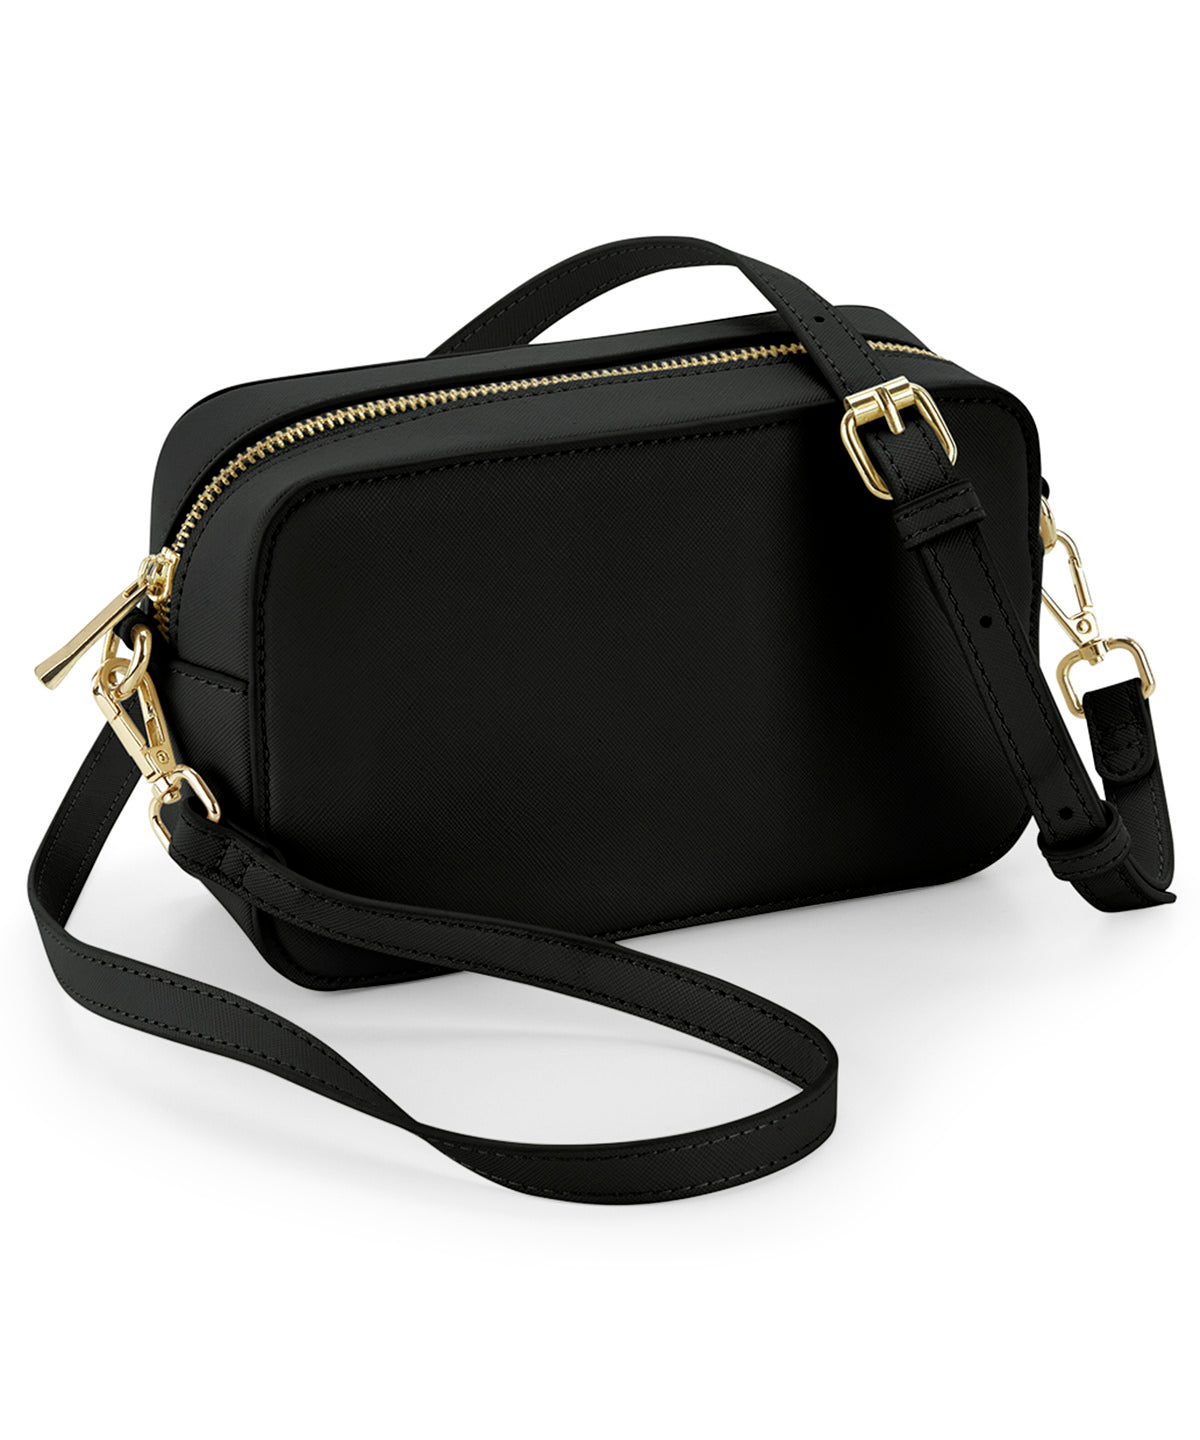 Personalised Bags - Black Bagbase Boutique cross body bag